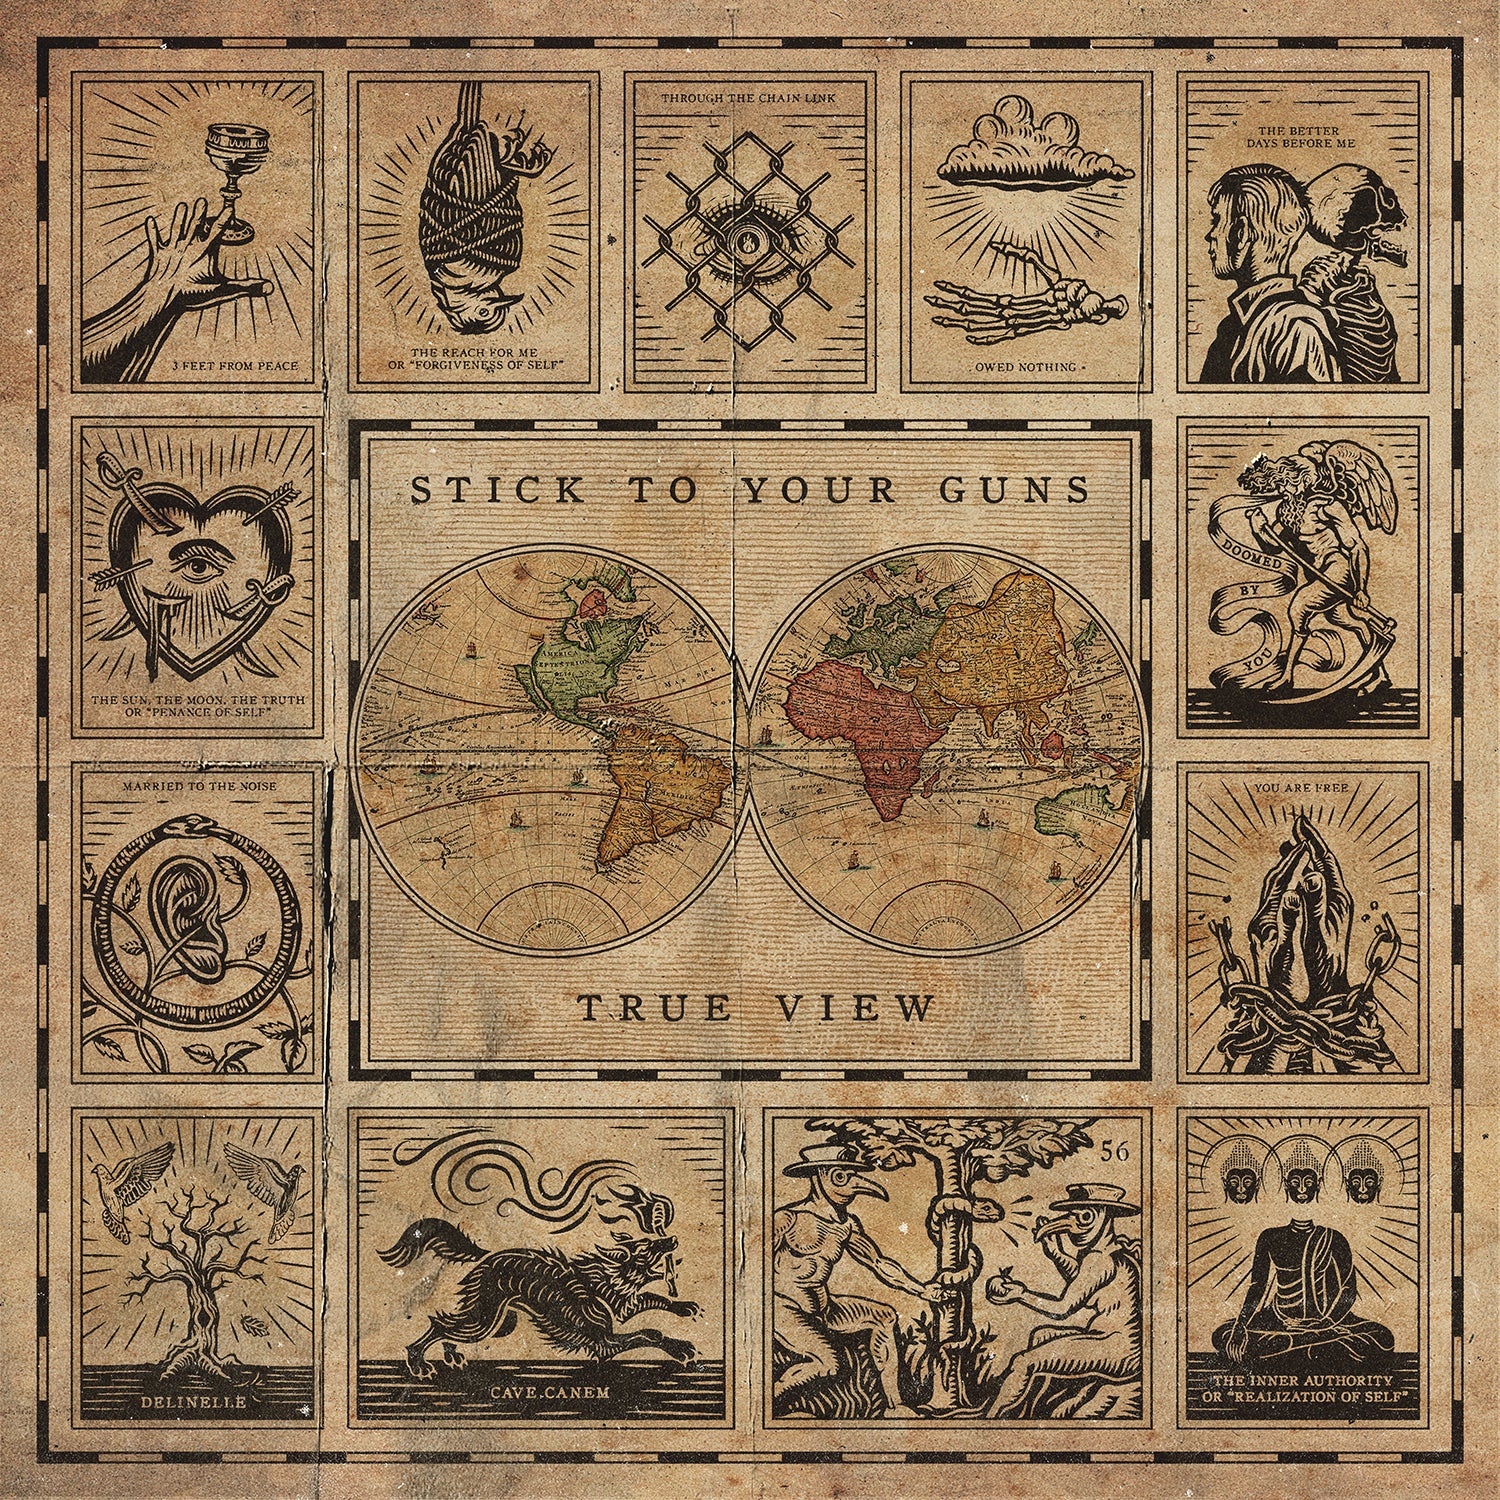 STICK TO YOUR GUNS "True View" CD